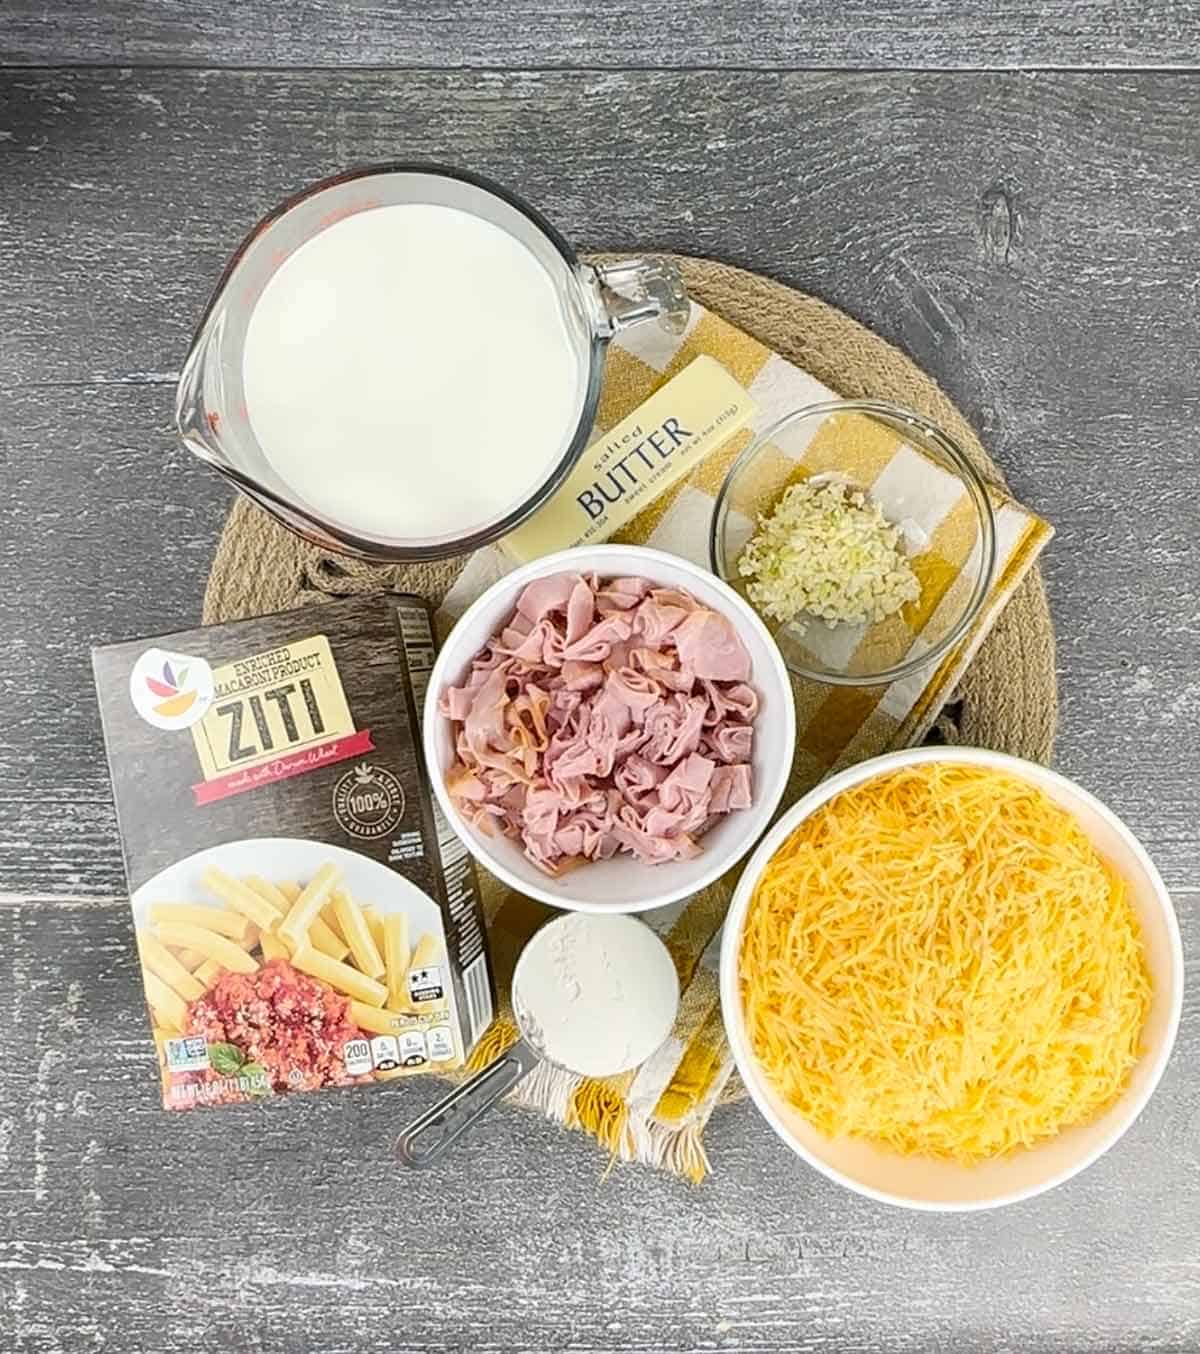 Ingredients for ham and cheese casserole on a placemat.